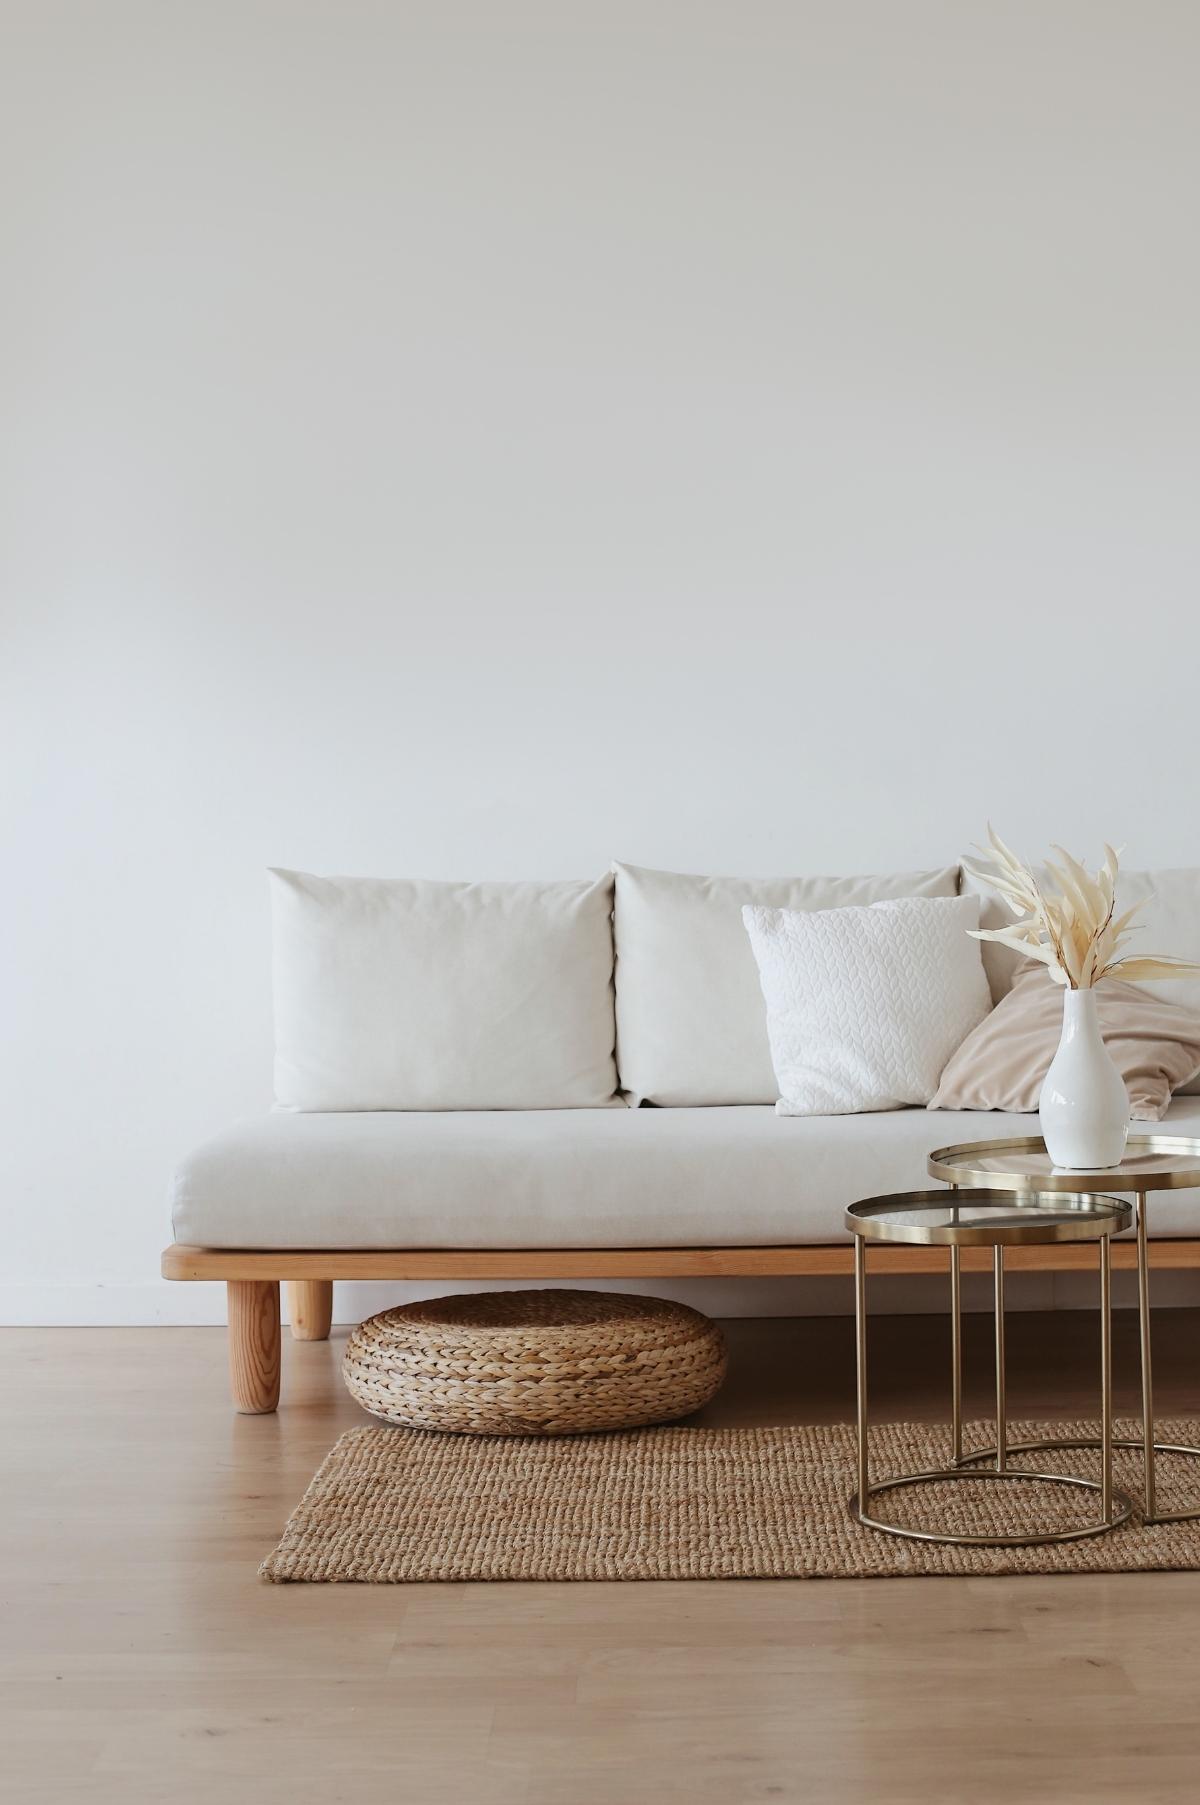 Need some decluttering inspiration to get your minimalist lifestyle going? These TED Talks about minimalism will make you want to declutter and simplify now